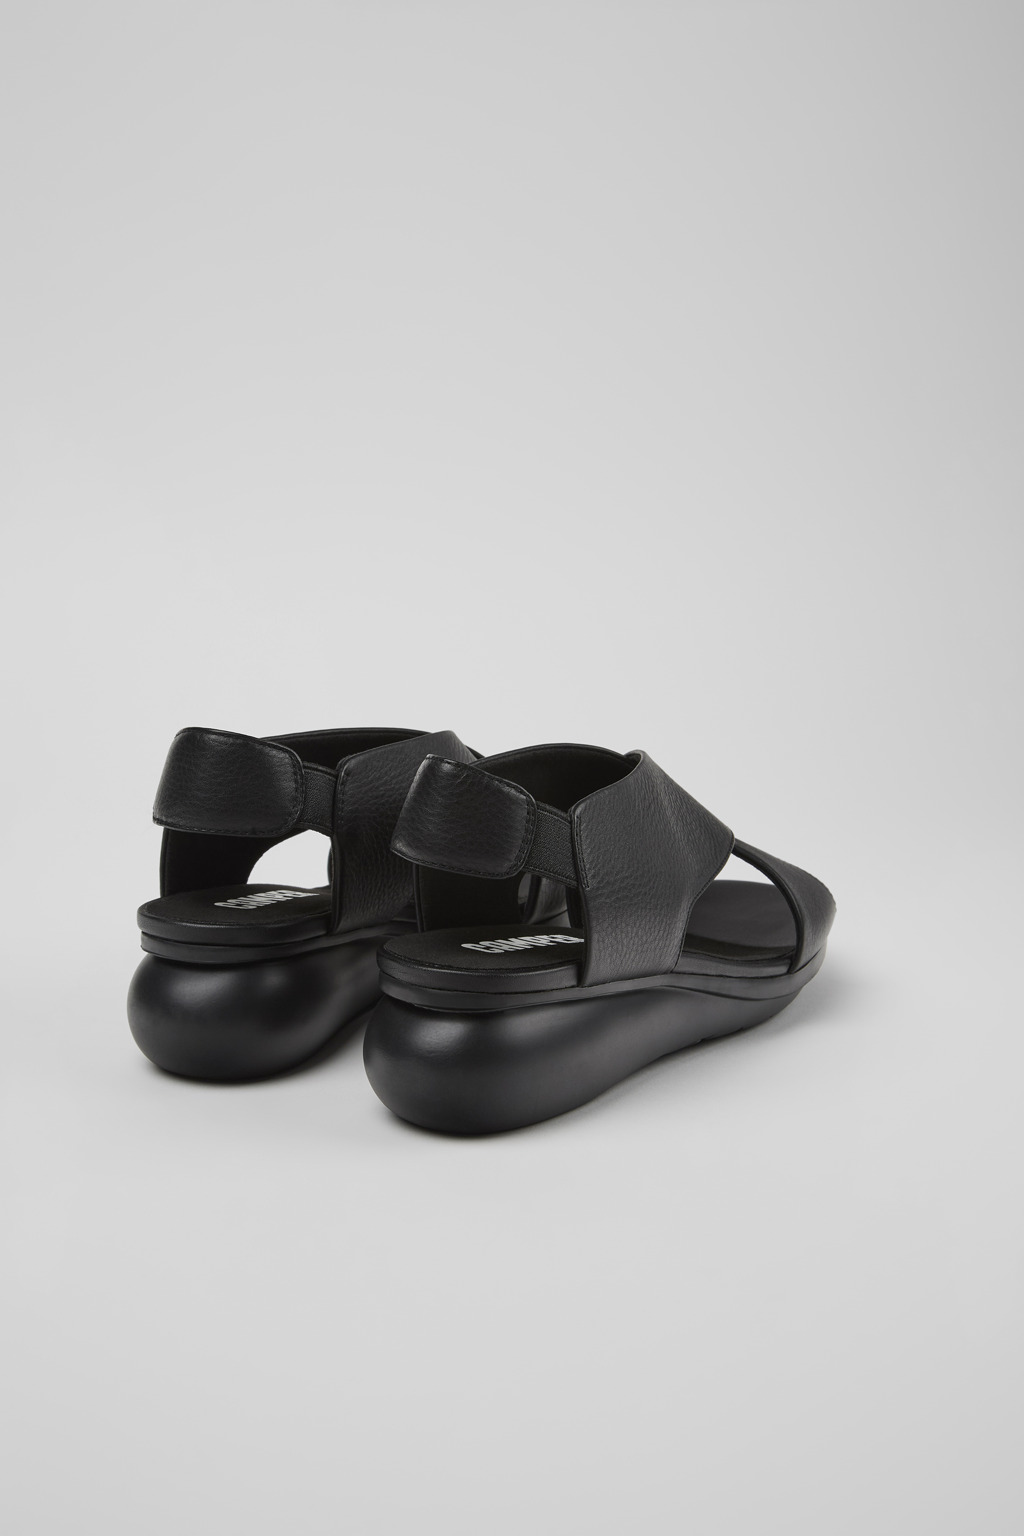 BALLOON Black Sandals for Women - Camper Shoes